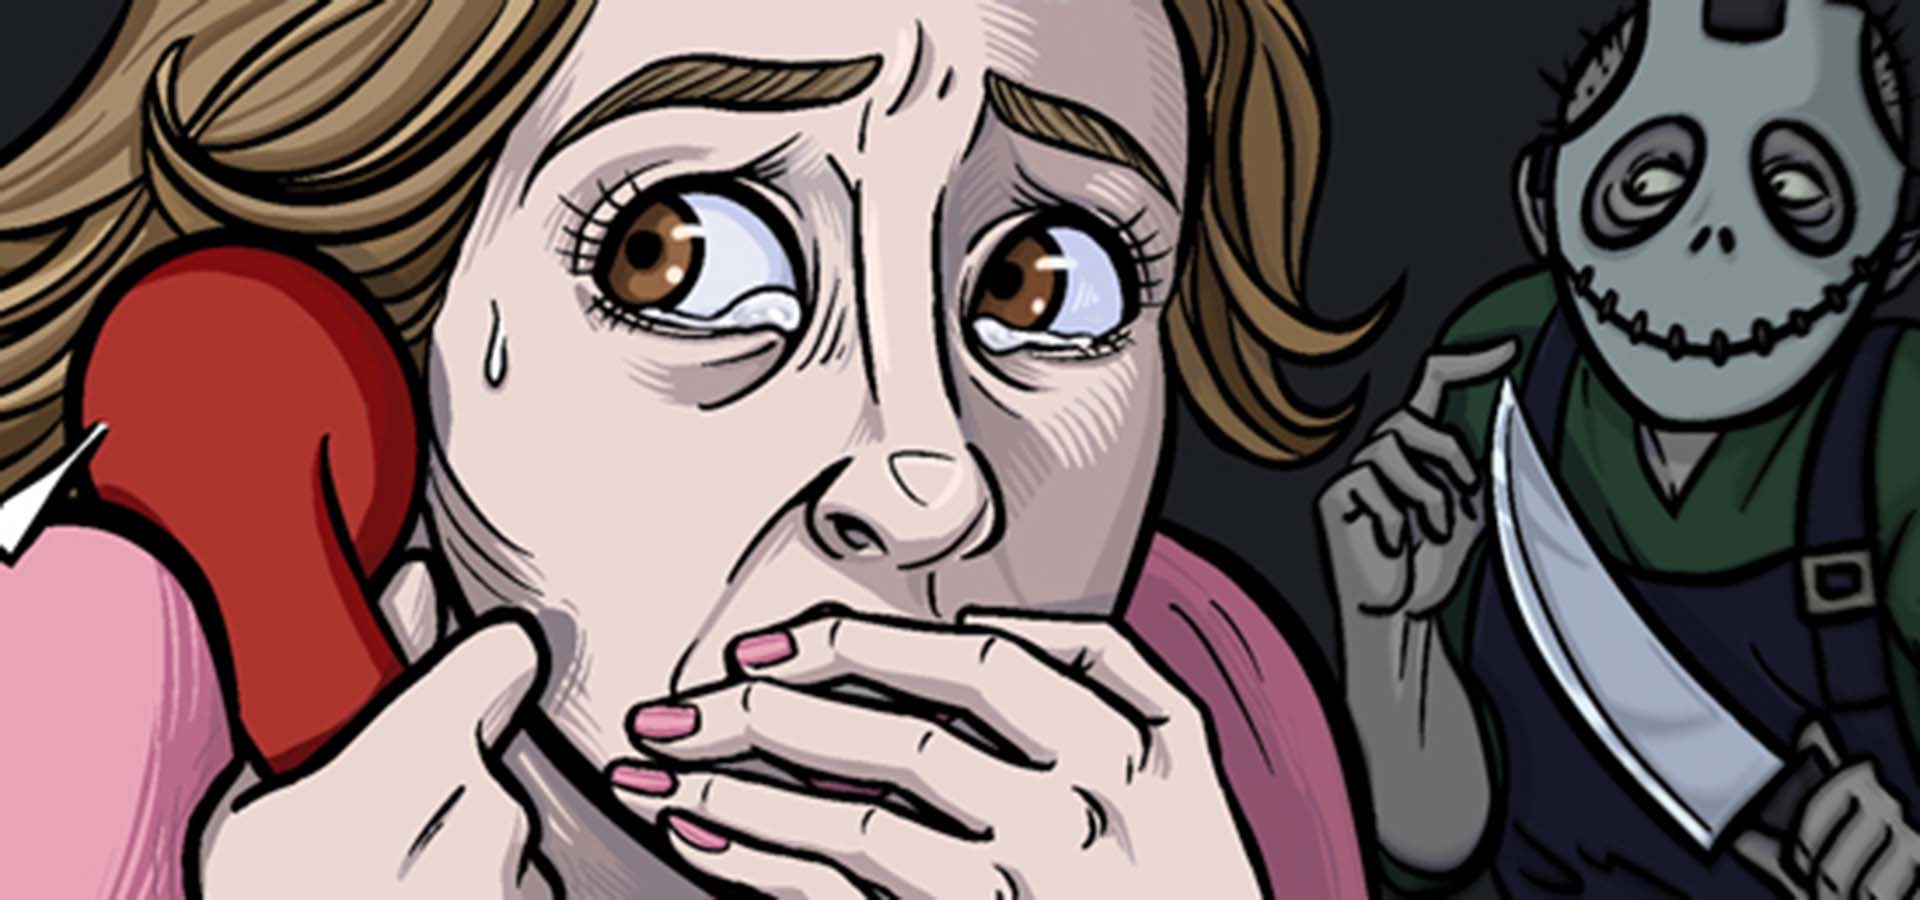 Comic book drawing of a women crying and making a phone call while serial killer is behind her.